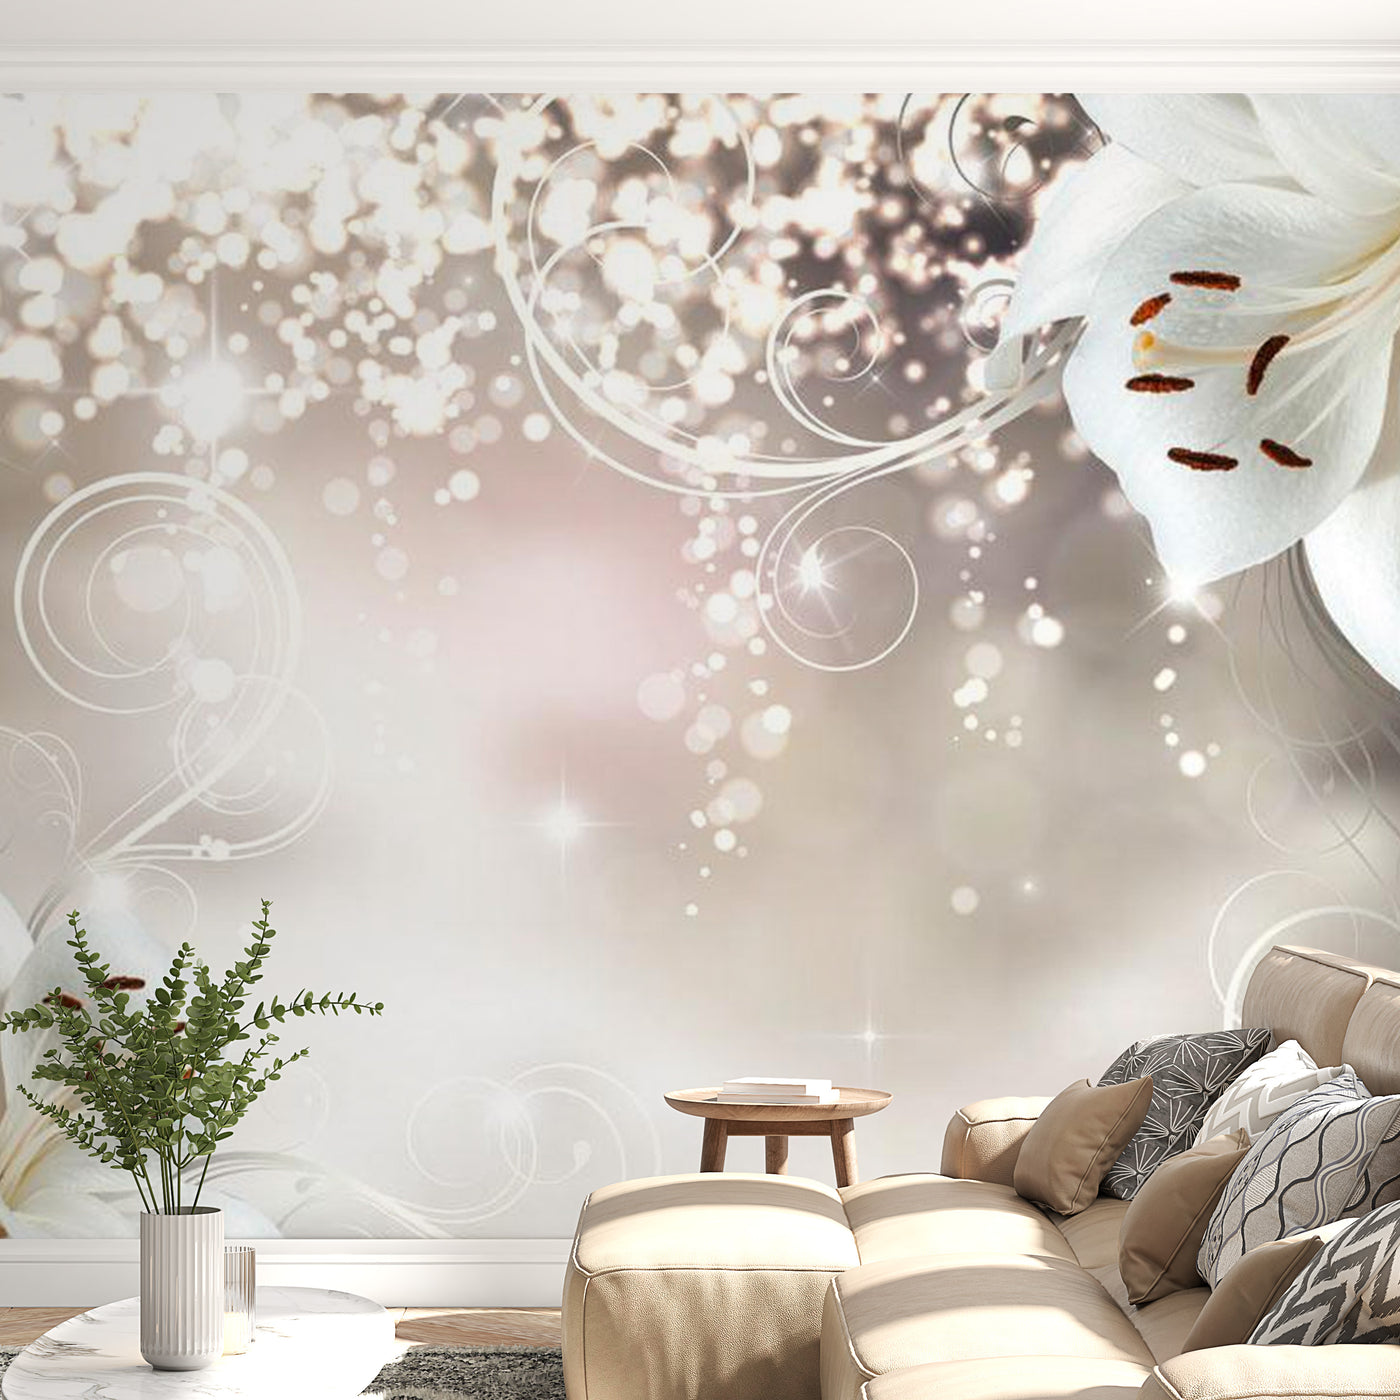 Peel & Stick Floral Wall Mural - Magic Composition - Removable Wall Decals